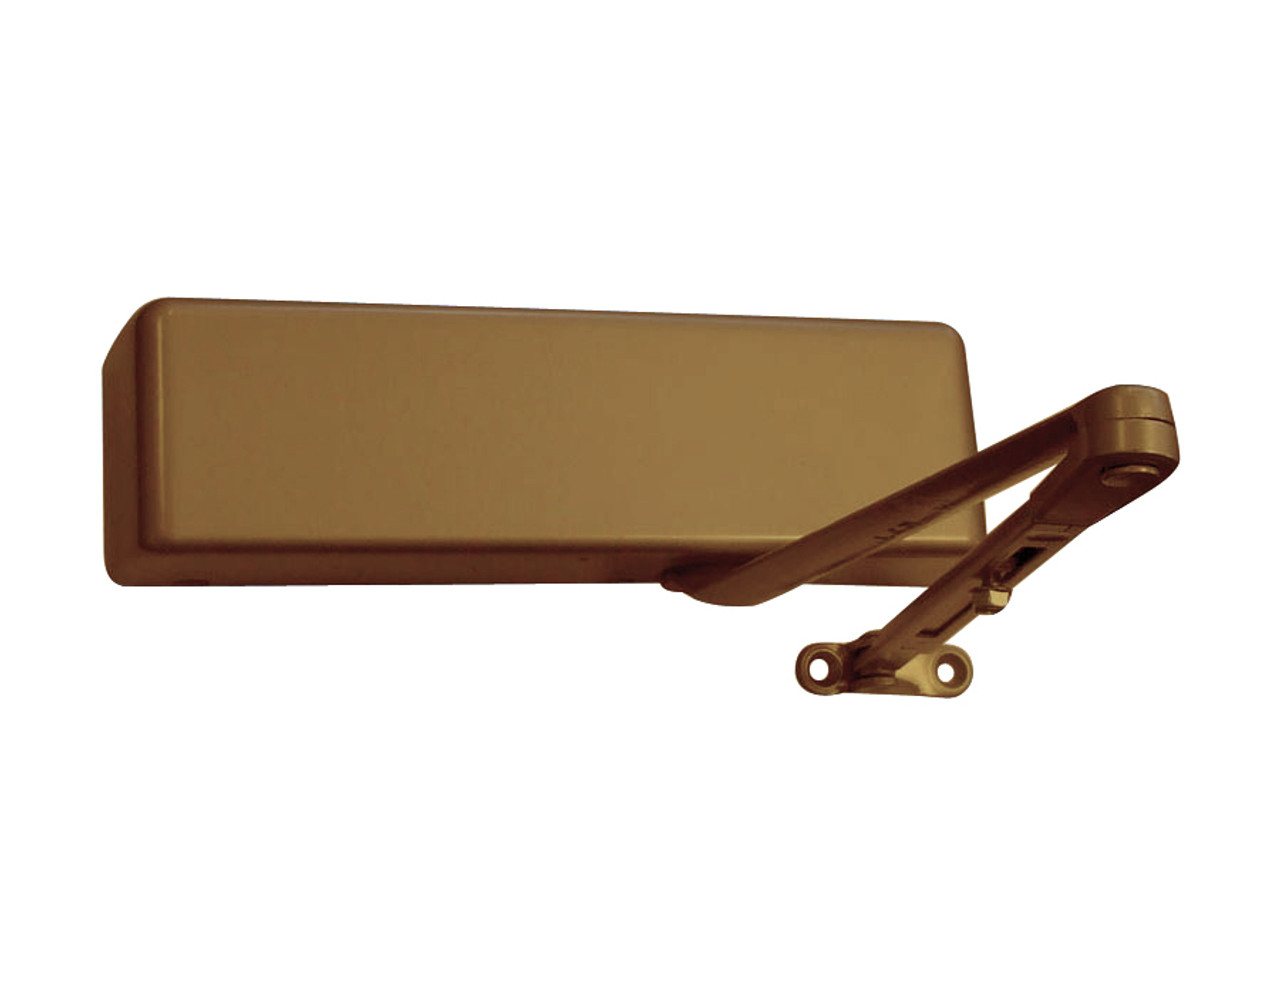 4026-FL-RH-STAT LCN Door Closer with Fusible Link in Statuary Finish